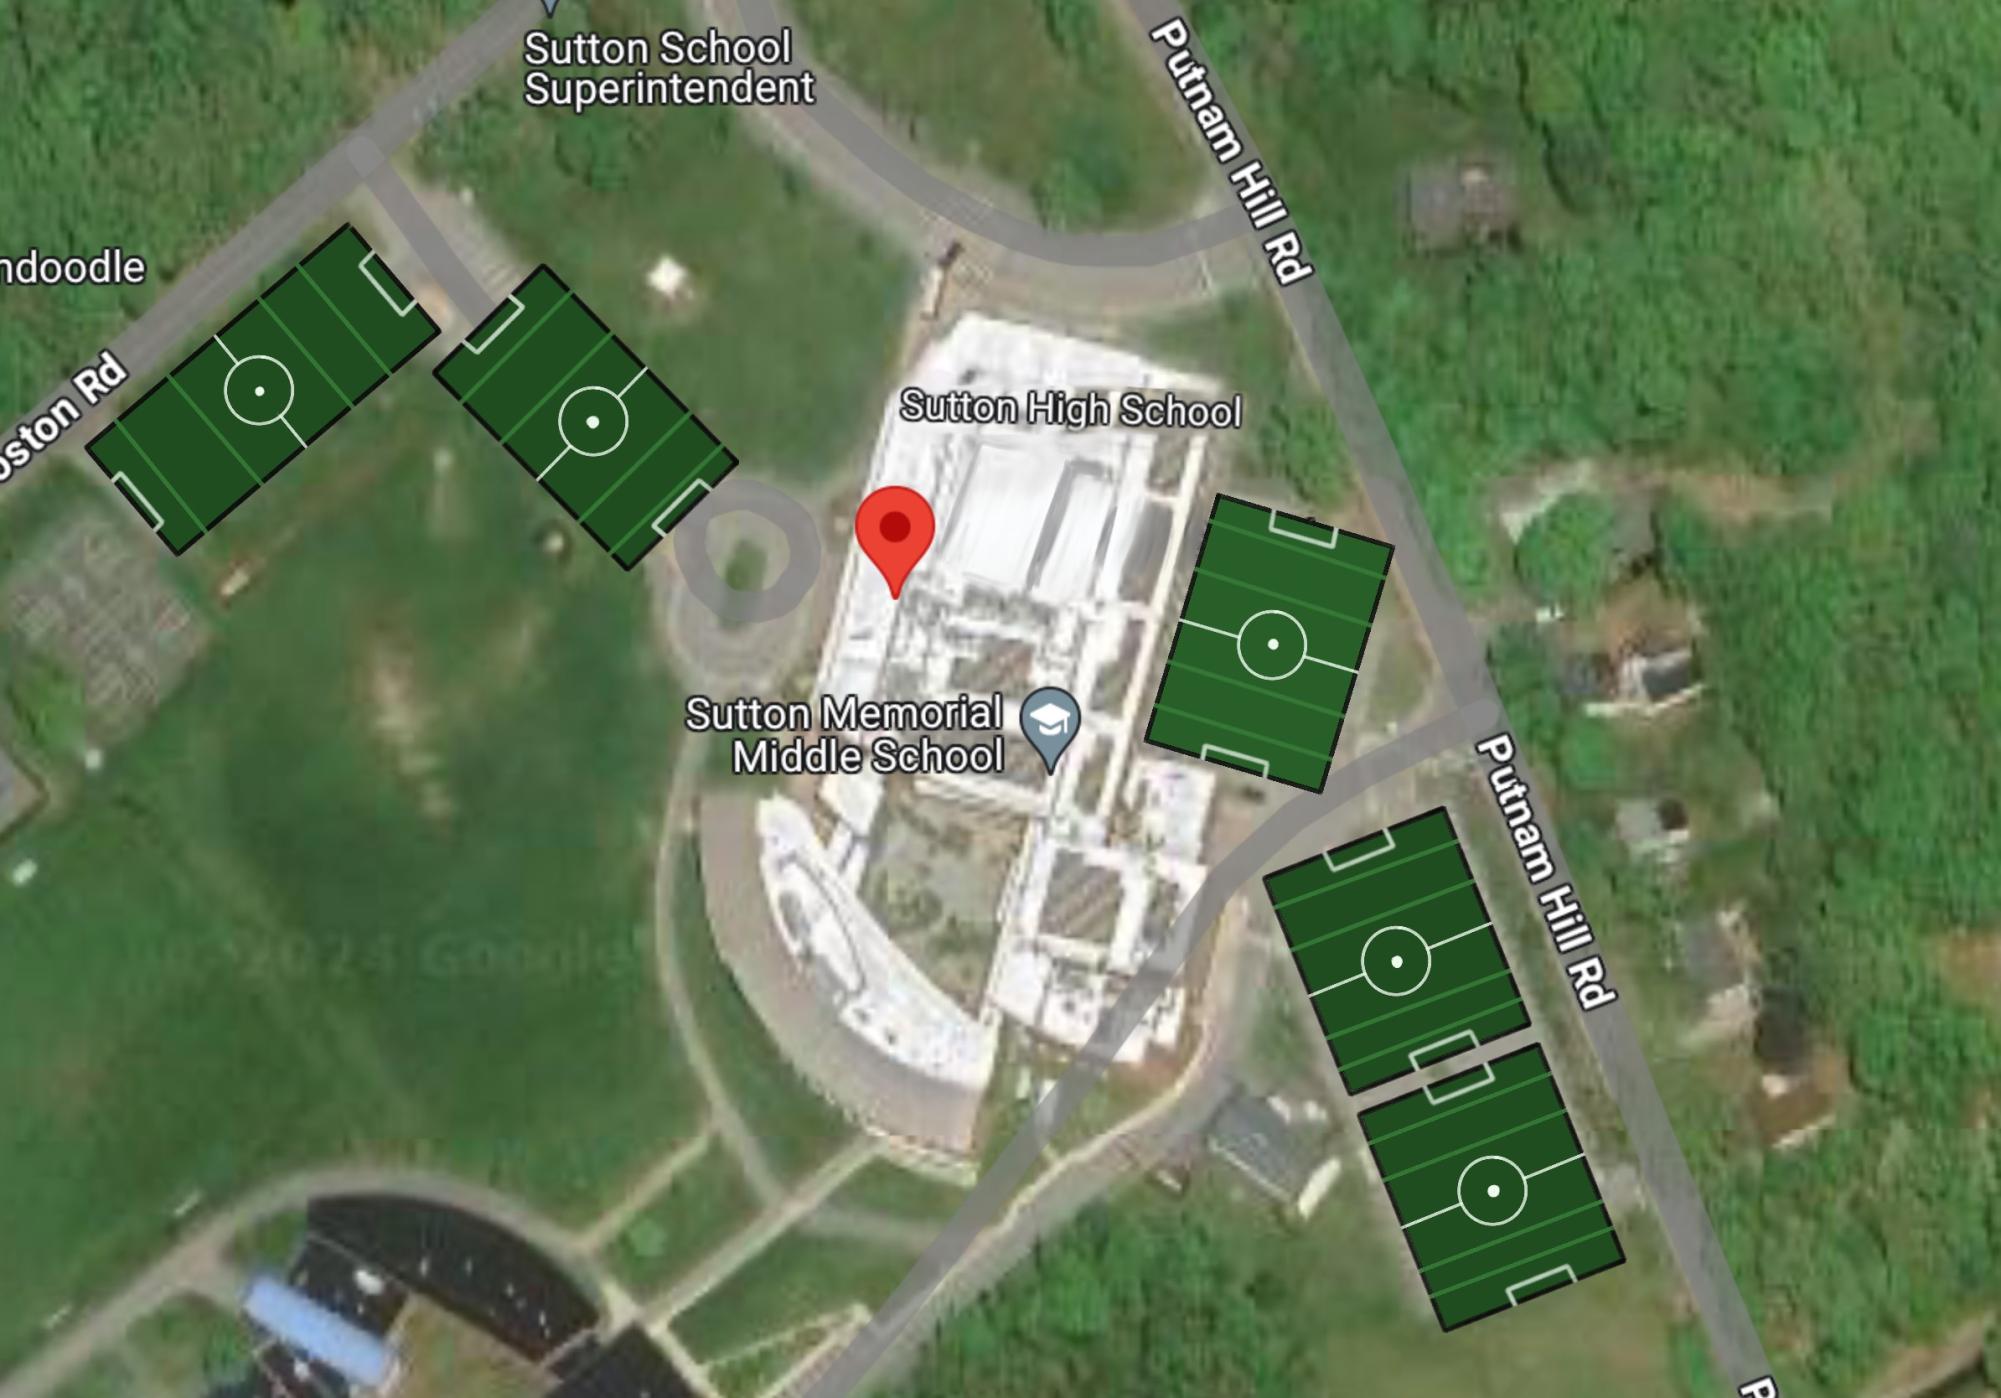 Whats+more+important%3A+soccer%2C+field+hockey%2C+and+football%2C+or+parking+for+faculty+and+students%3F